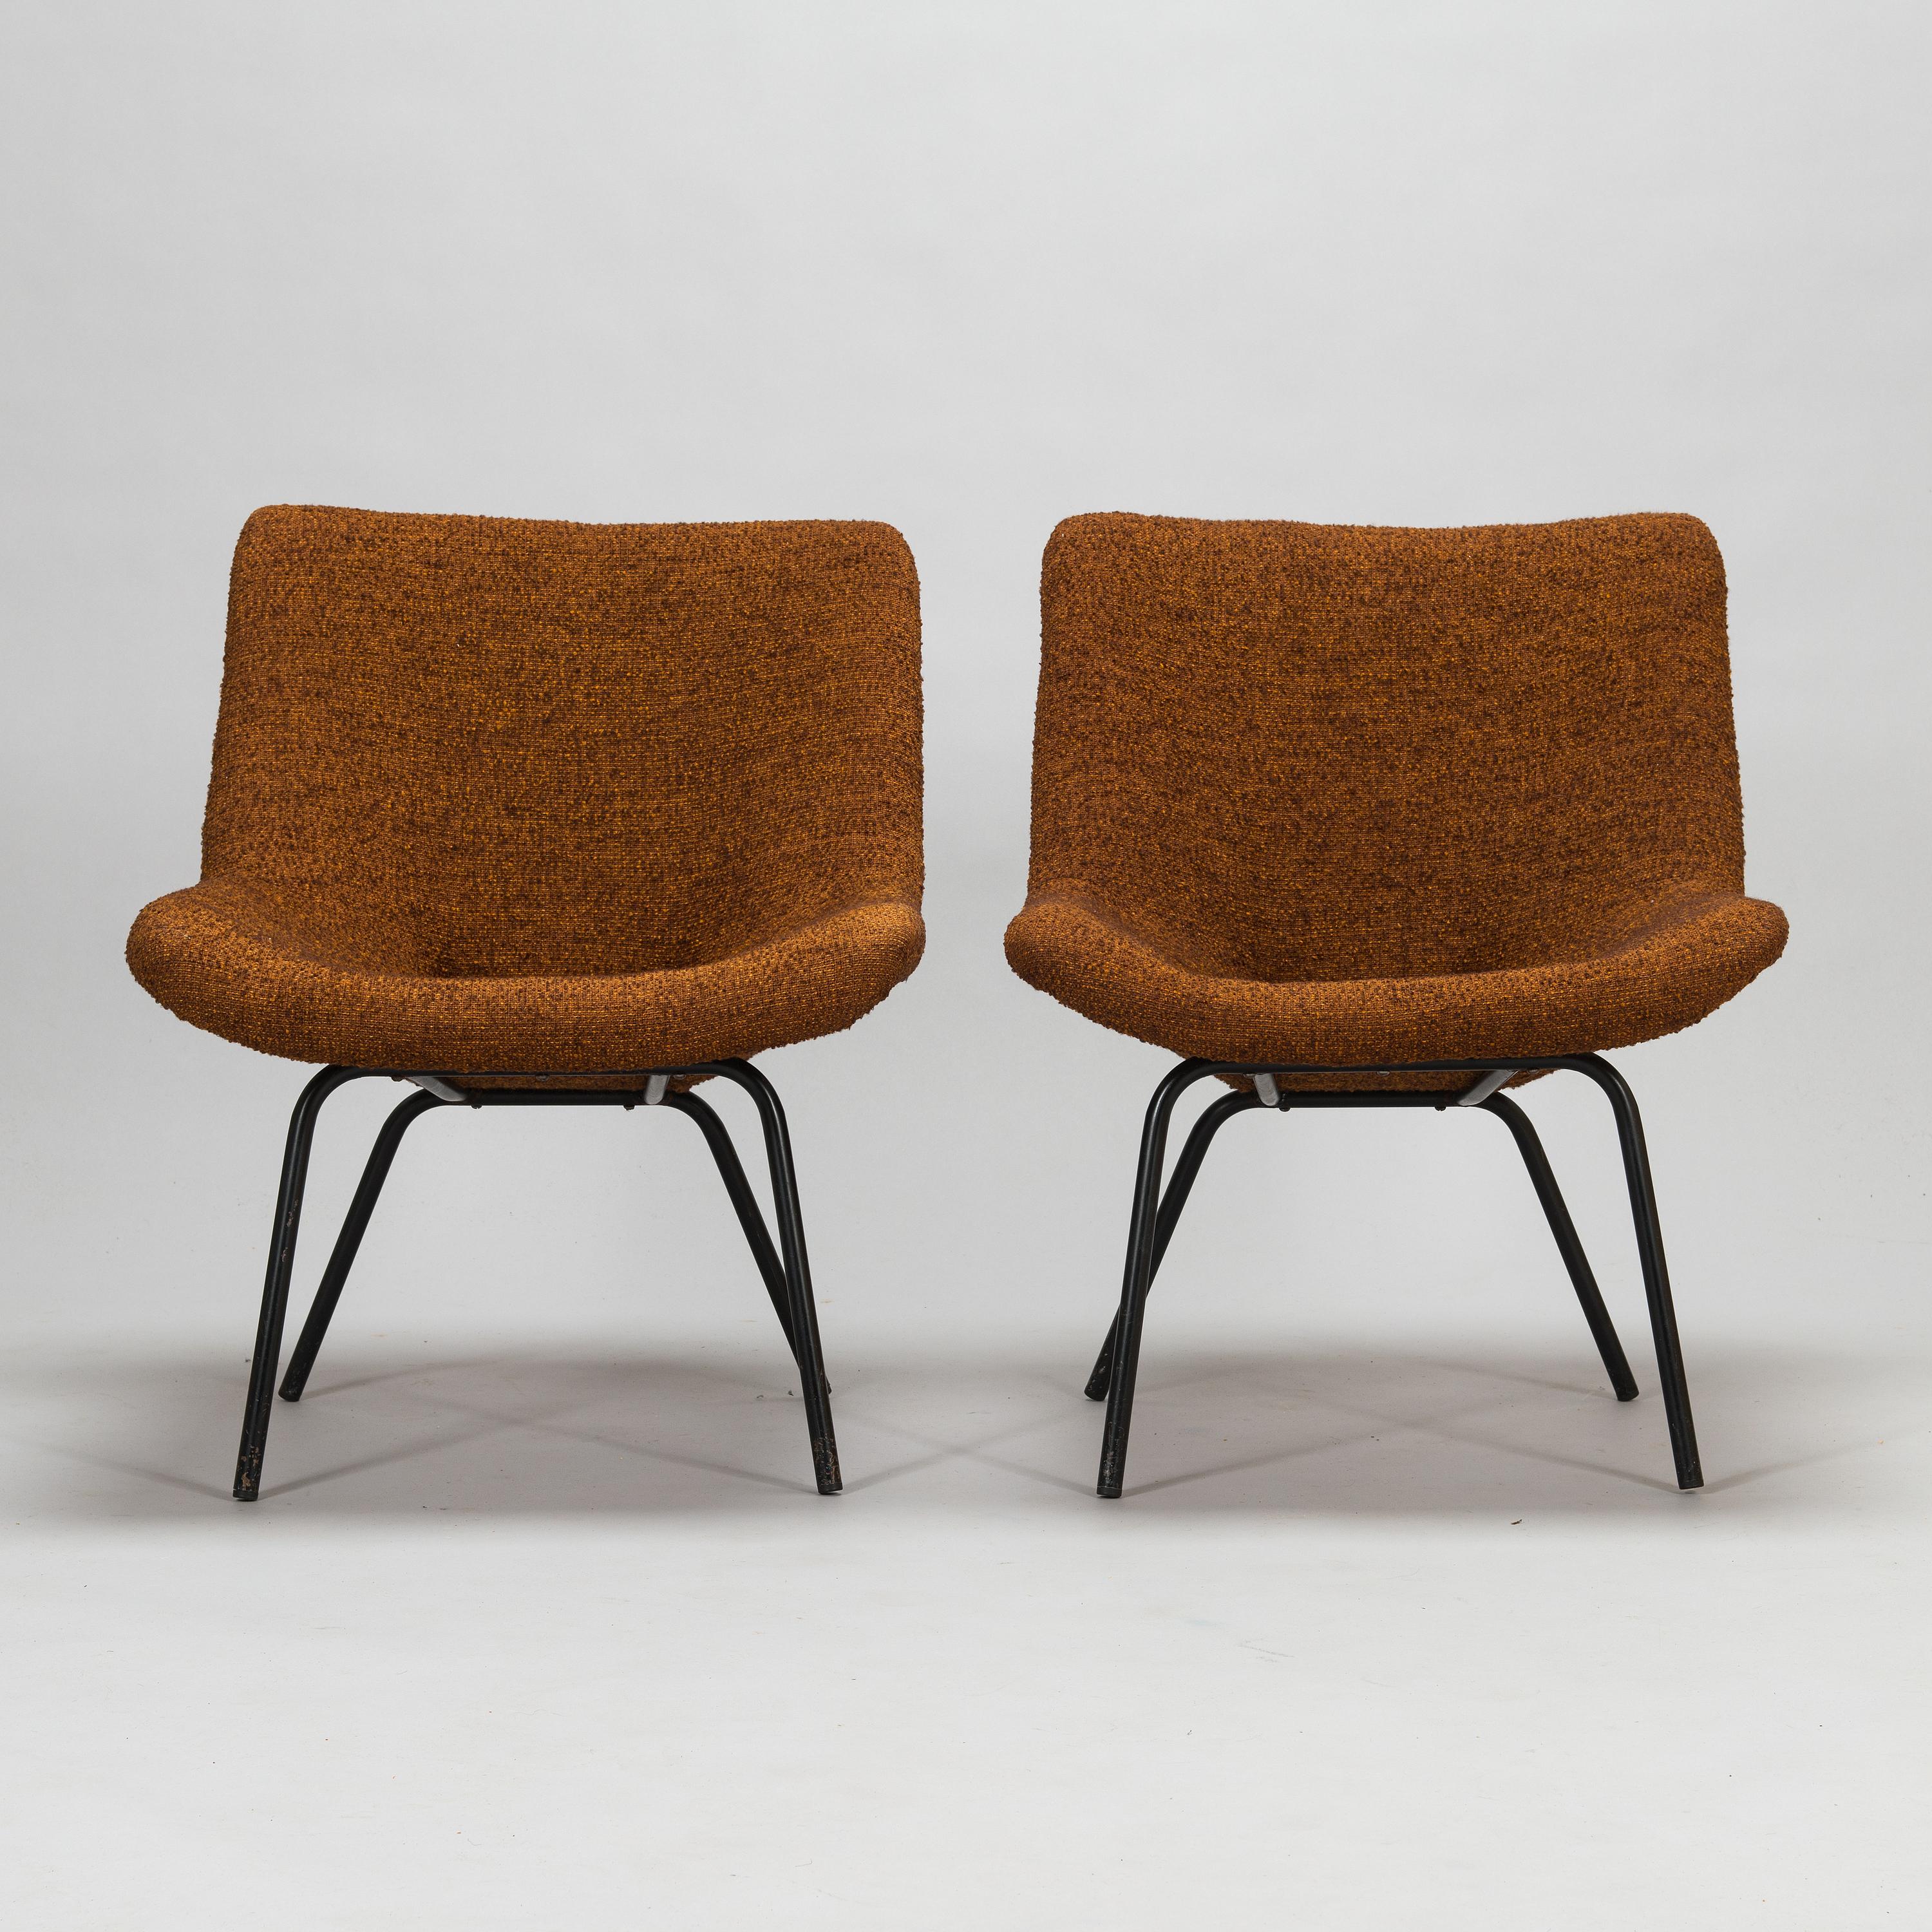 Rare pair of Scandinavian modern easy chairs, model “Lehti” (leaf) designed by Carl Gustaf Hiort af Ornäs.
Manufactured by Puunveisto Oy - Träsnideri in Finland during the 1950s.
Black lacquered tubular steel base.